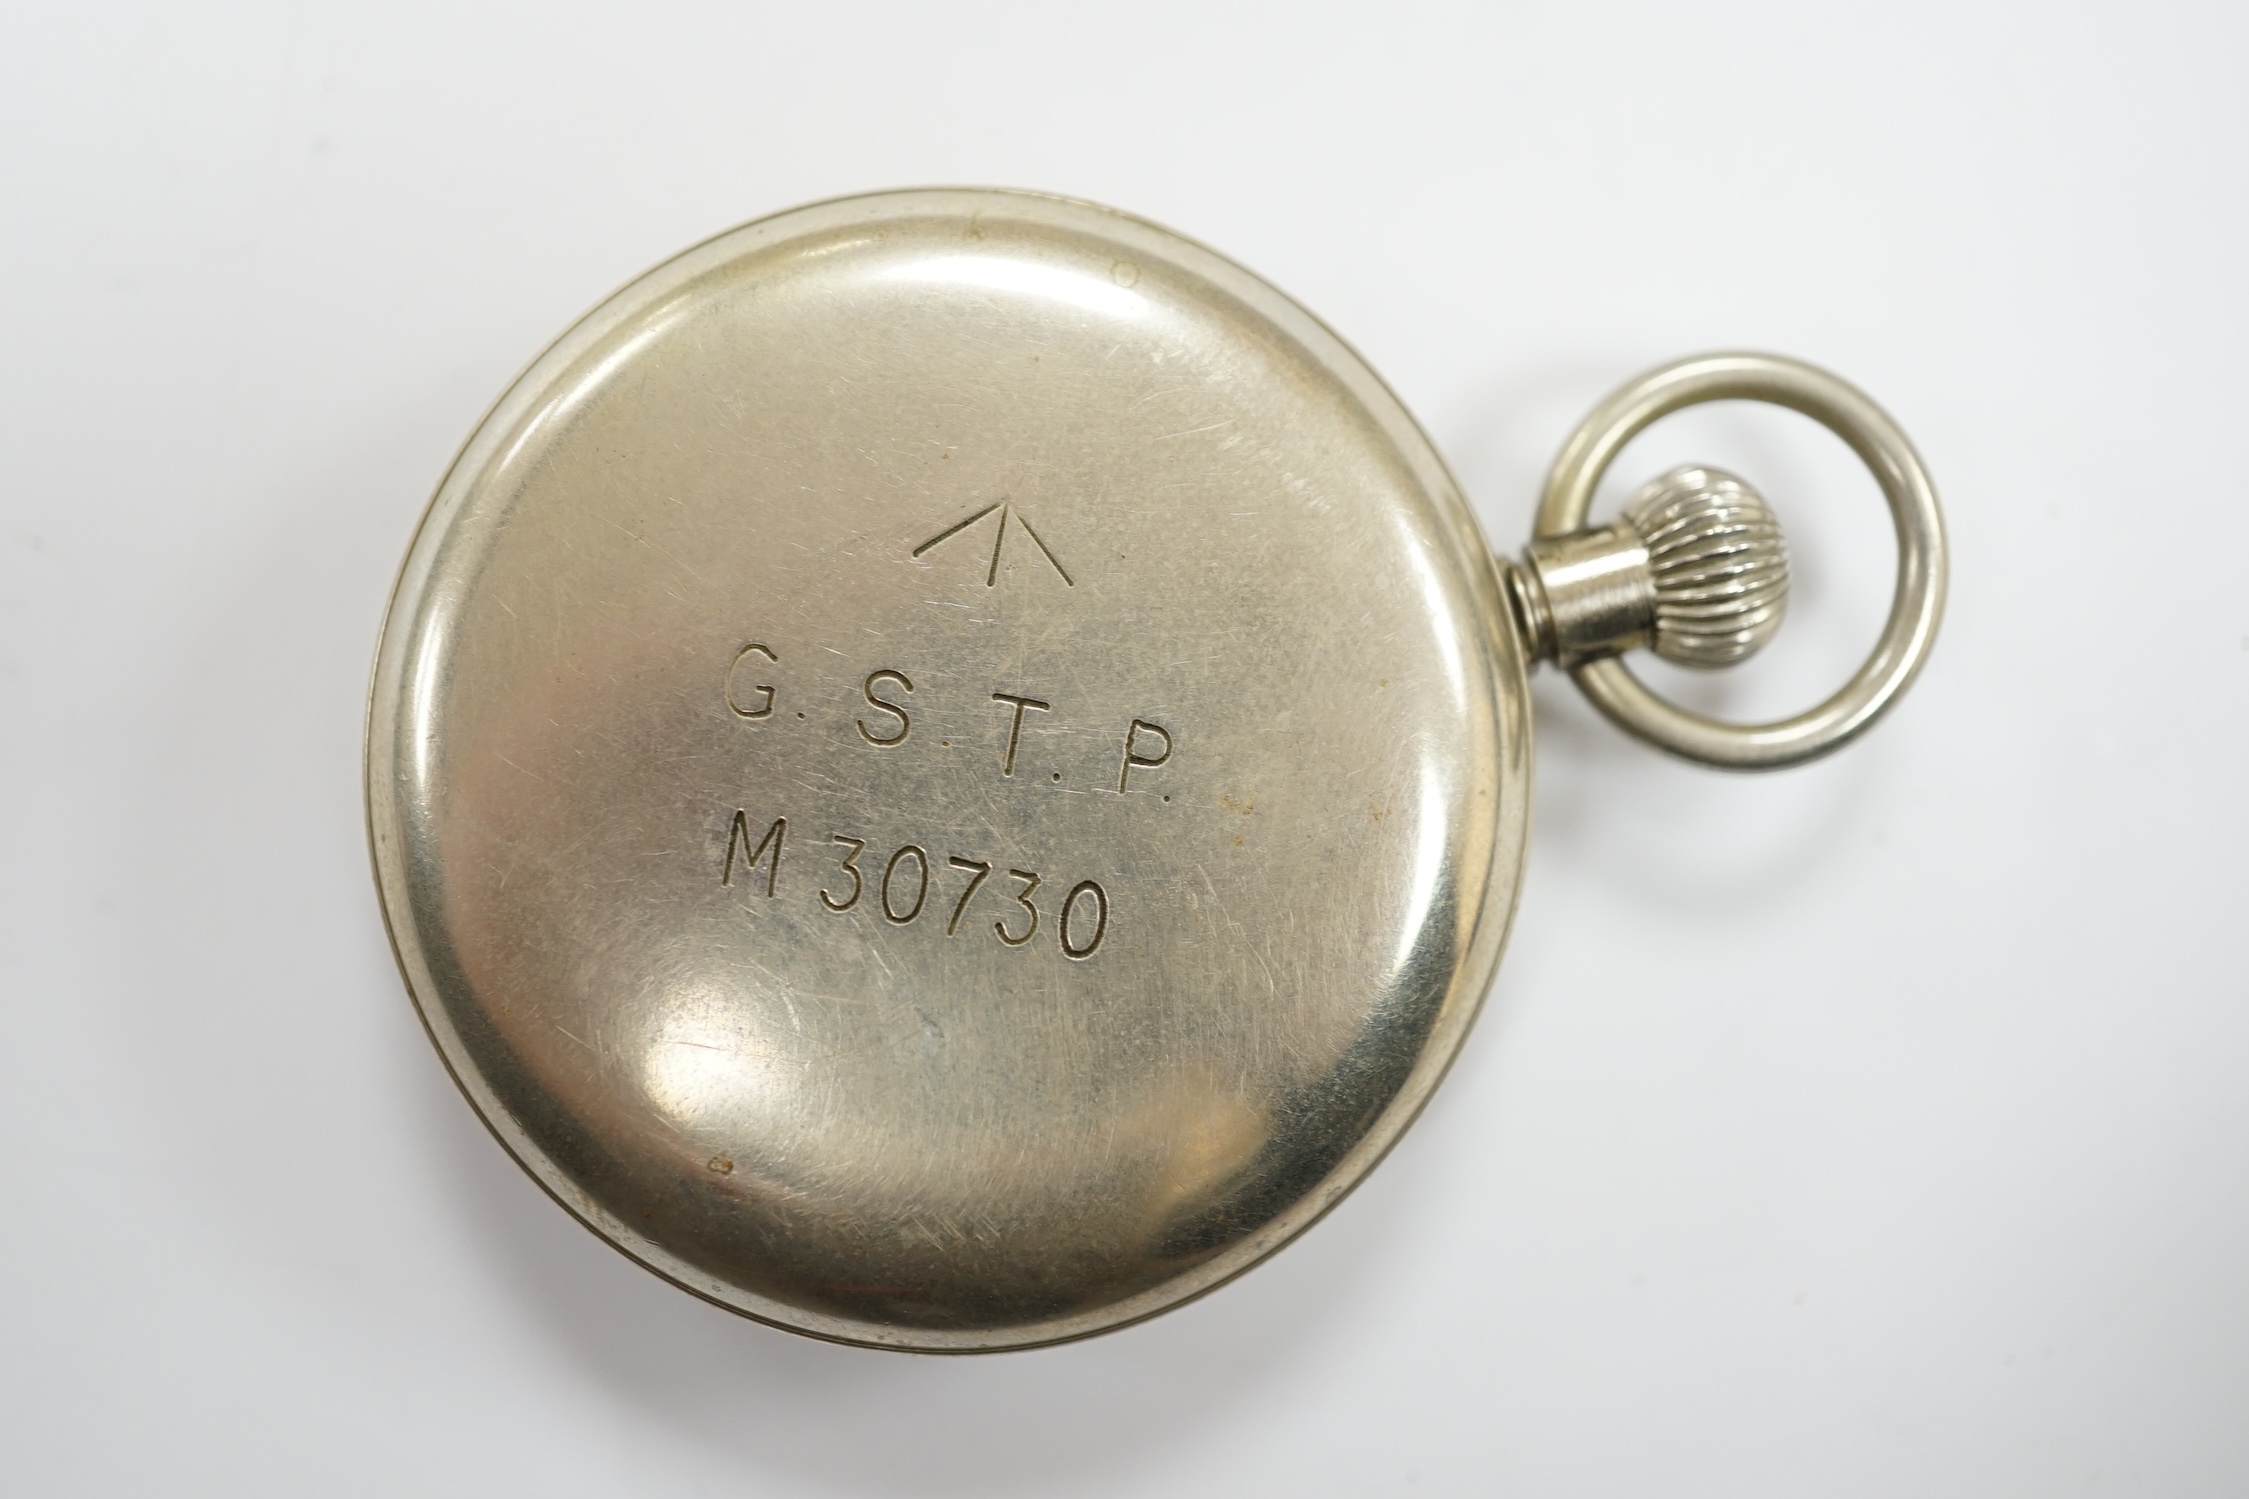 A nickel cased Moeris military G.S.T.P. (General Service Trade Pattern) open face pocket watch, with Arabic dial and subsidiary seconds, case diameter 50mm.